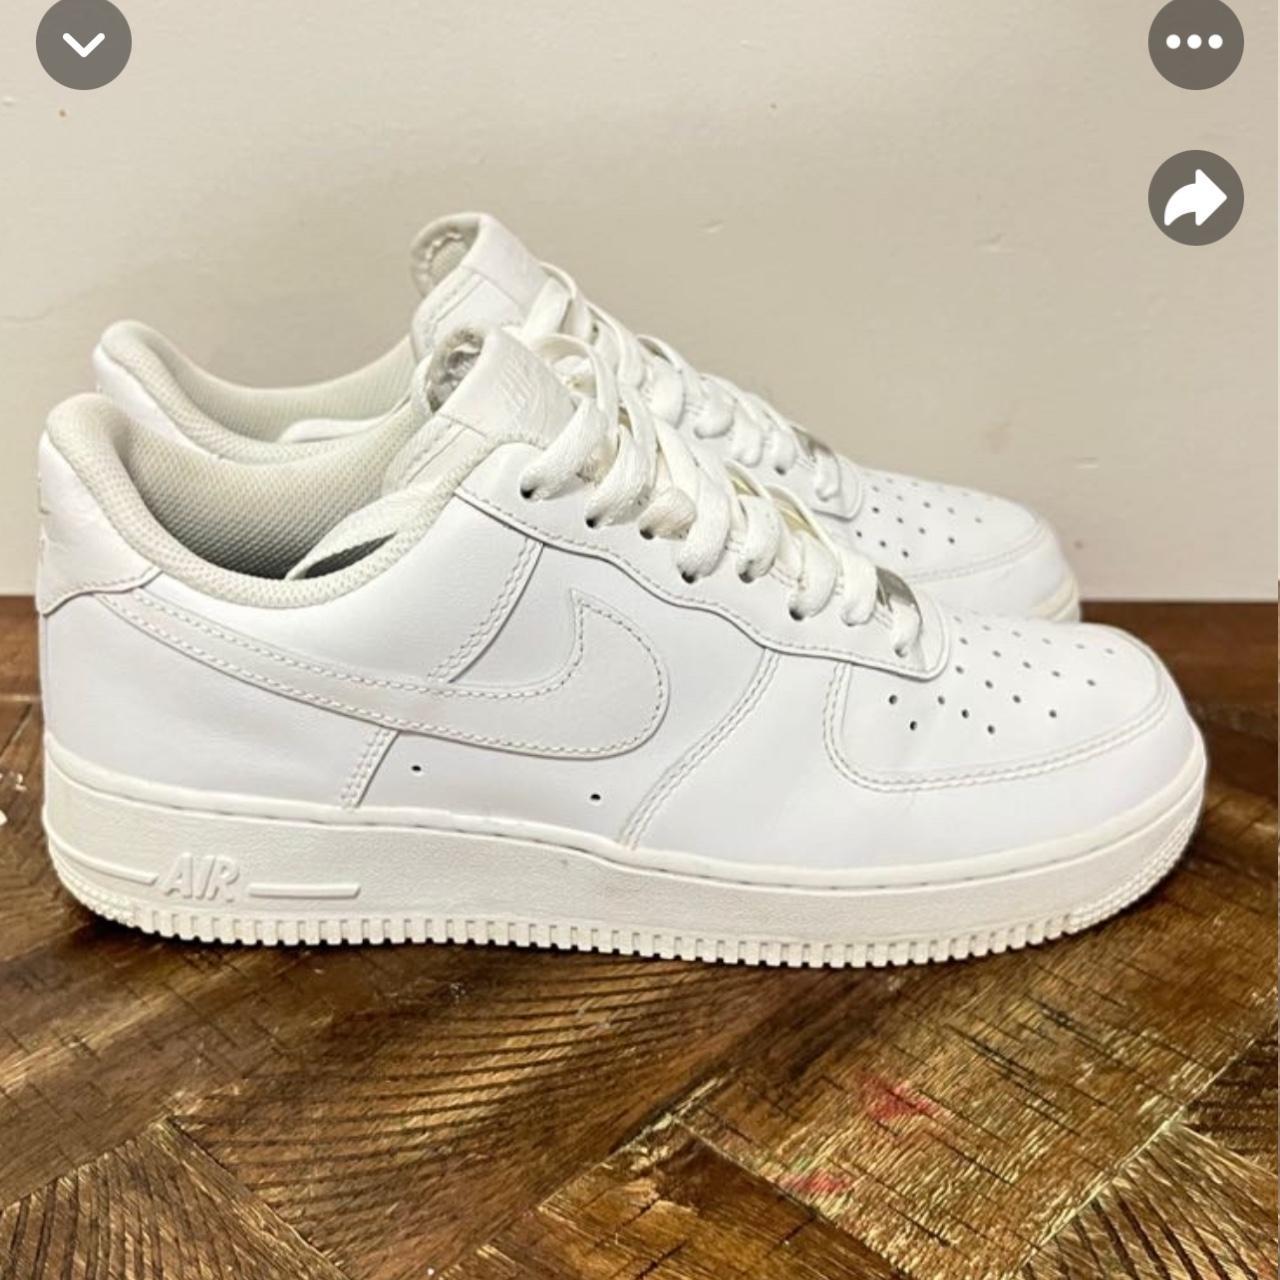 Nike Air Force 1 - all white - size 9 ! No major... - Depop